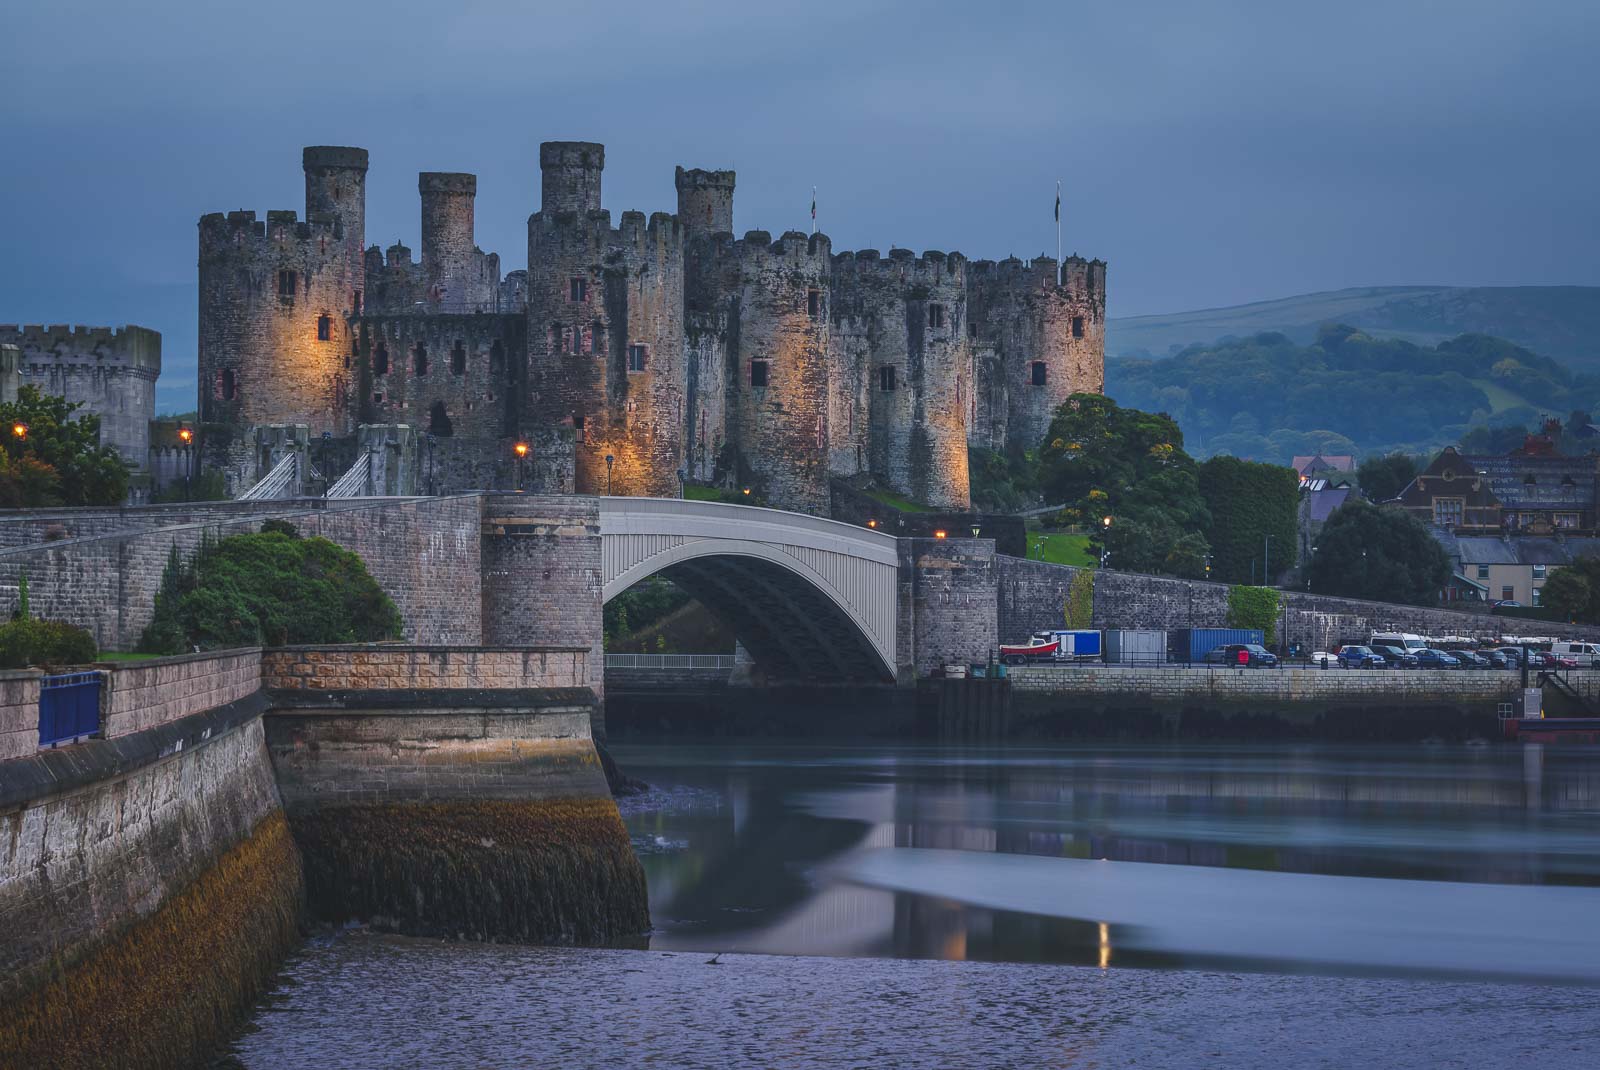 Village odf Conwy and Conwy Castle in Wales